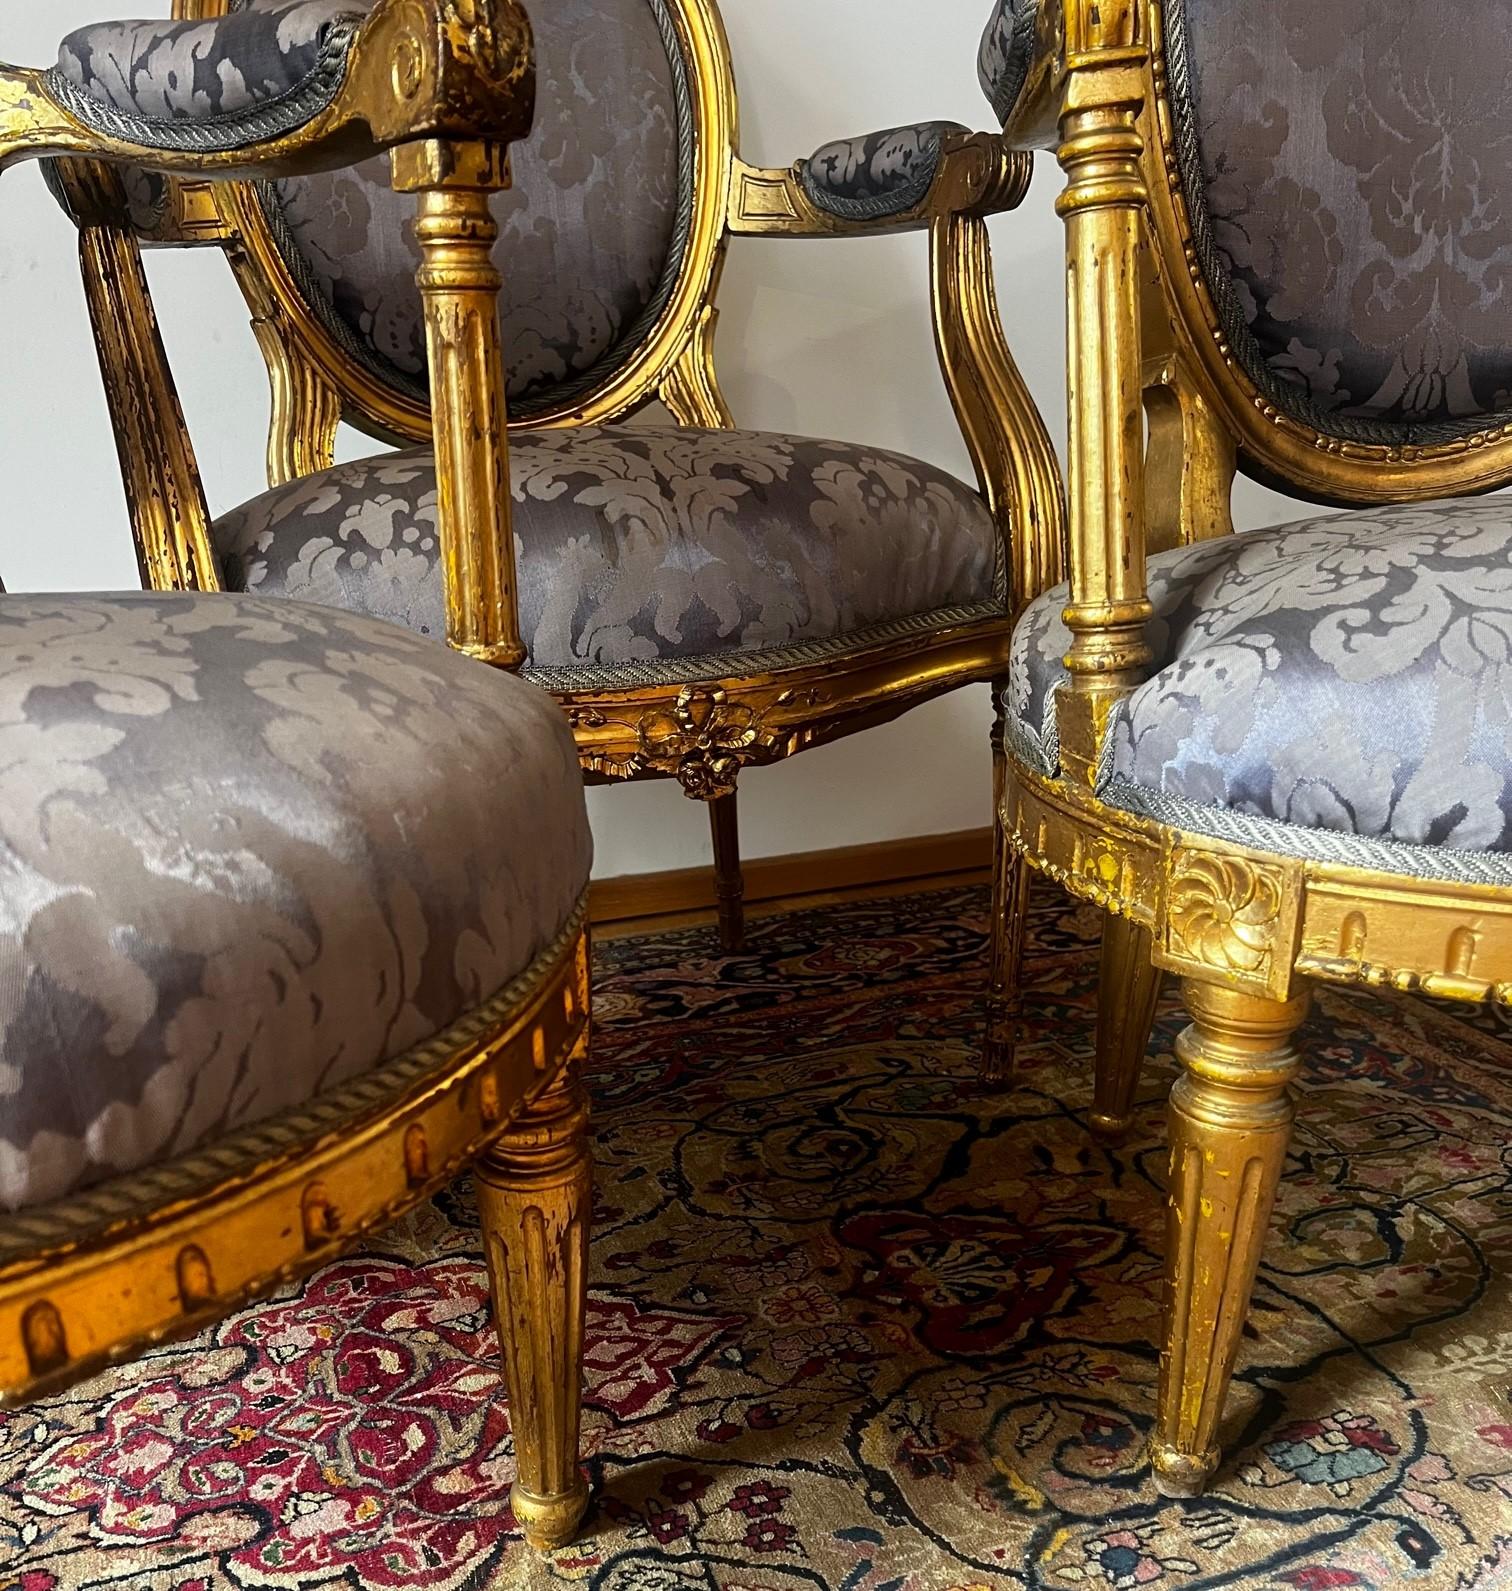 This magnificent set of three French antique Louis XVI (ca 1770) gold gilded armchairs originated from the region of Avignon. These stunning original armchairs are elegant and characterising an epoch –most of the furniture of this time was made for